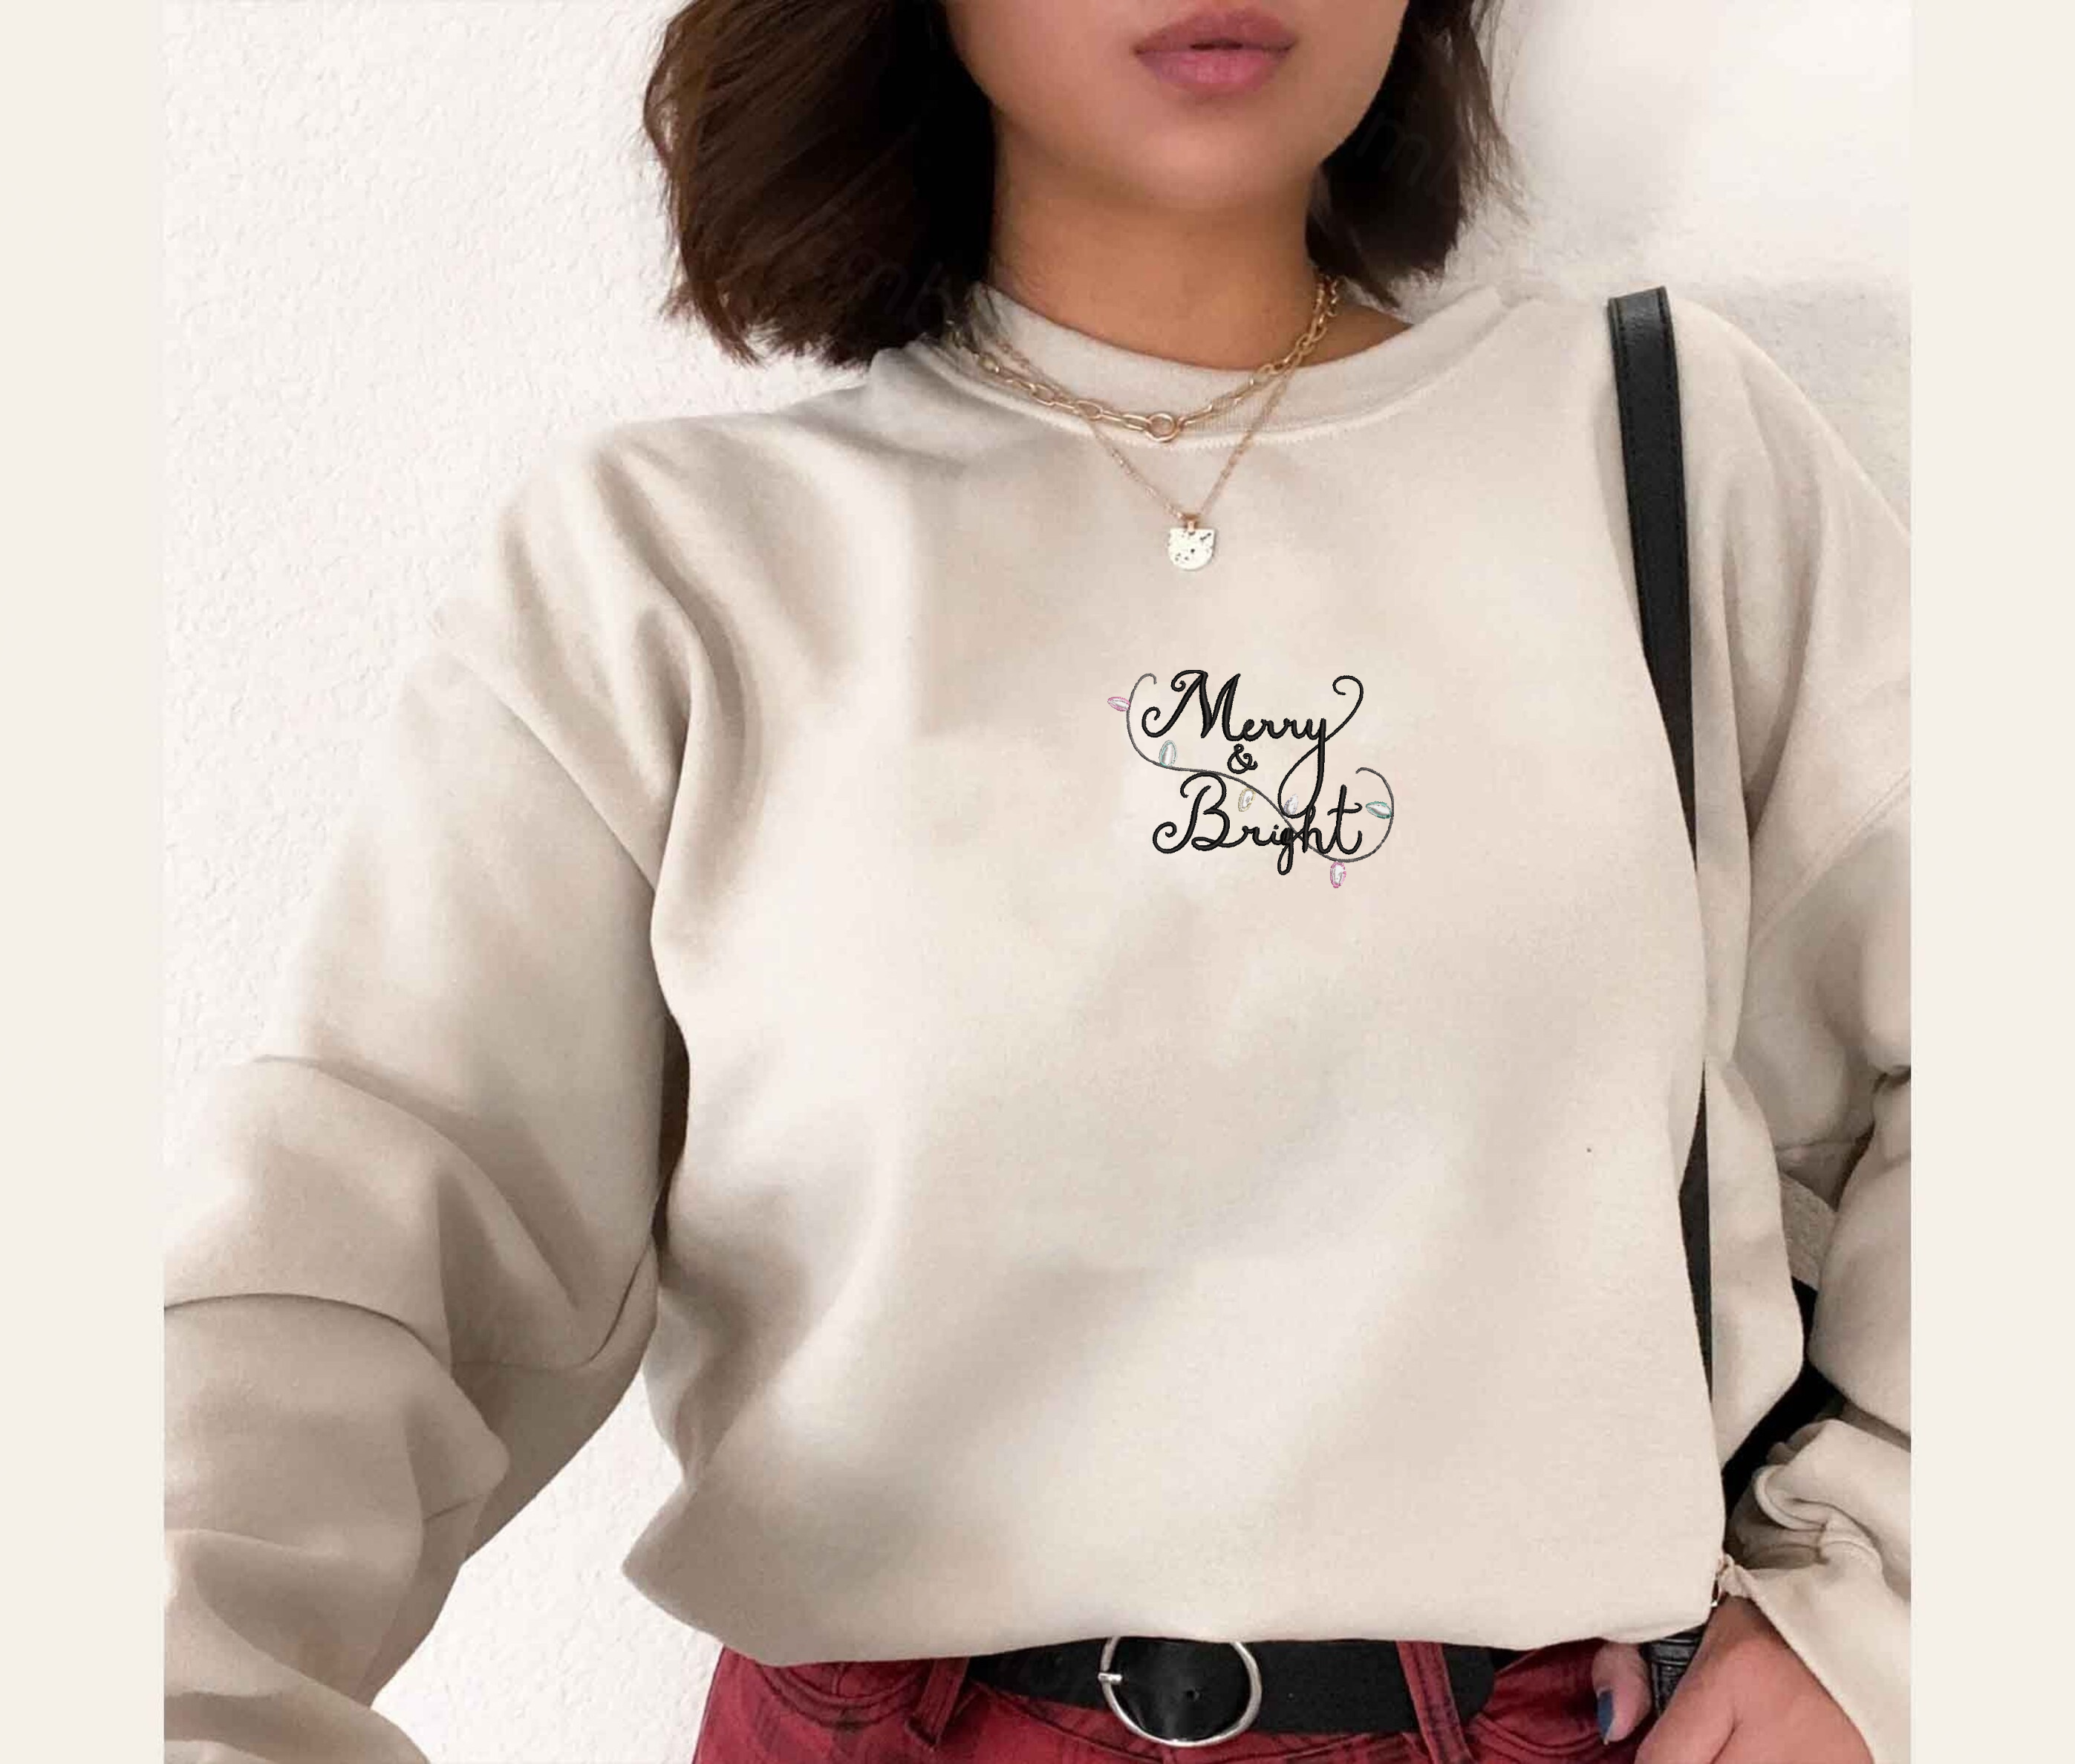 Merry & Bright Christmas Embroly - Embroidered Sweatshirt, Hoodie